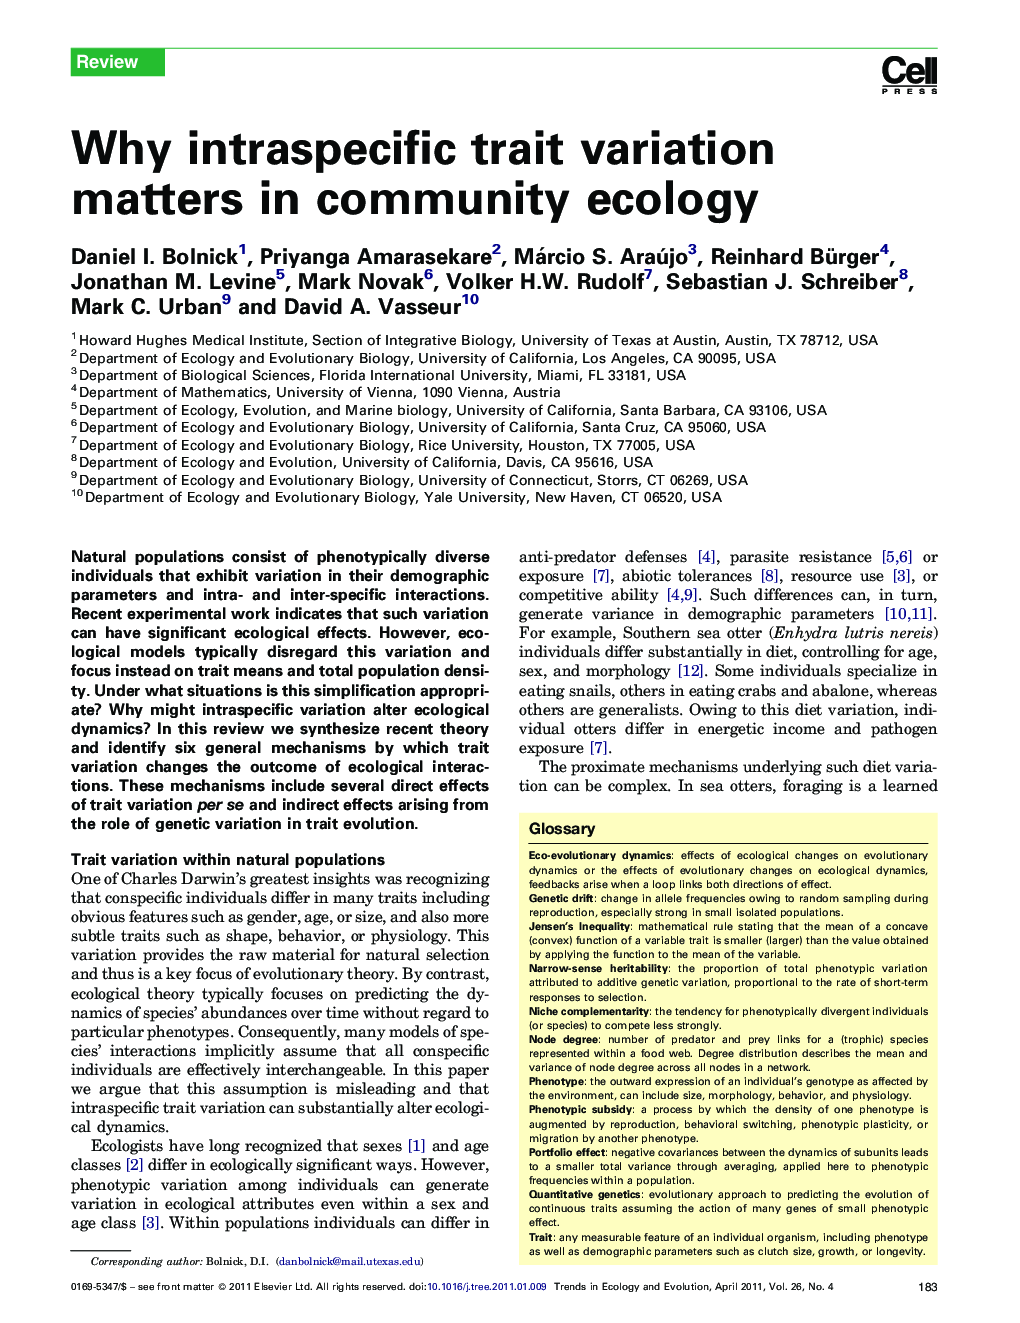 Why intraspecific trait variation matters in community ecology